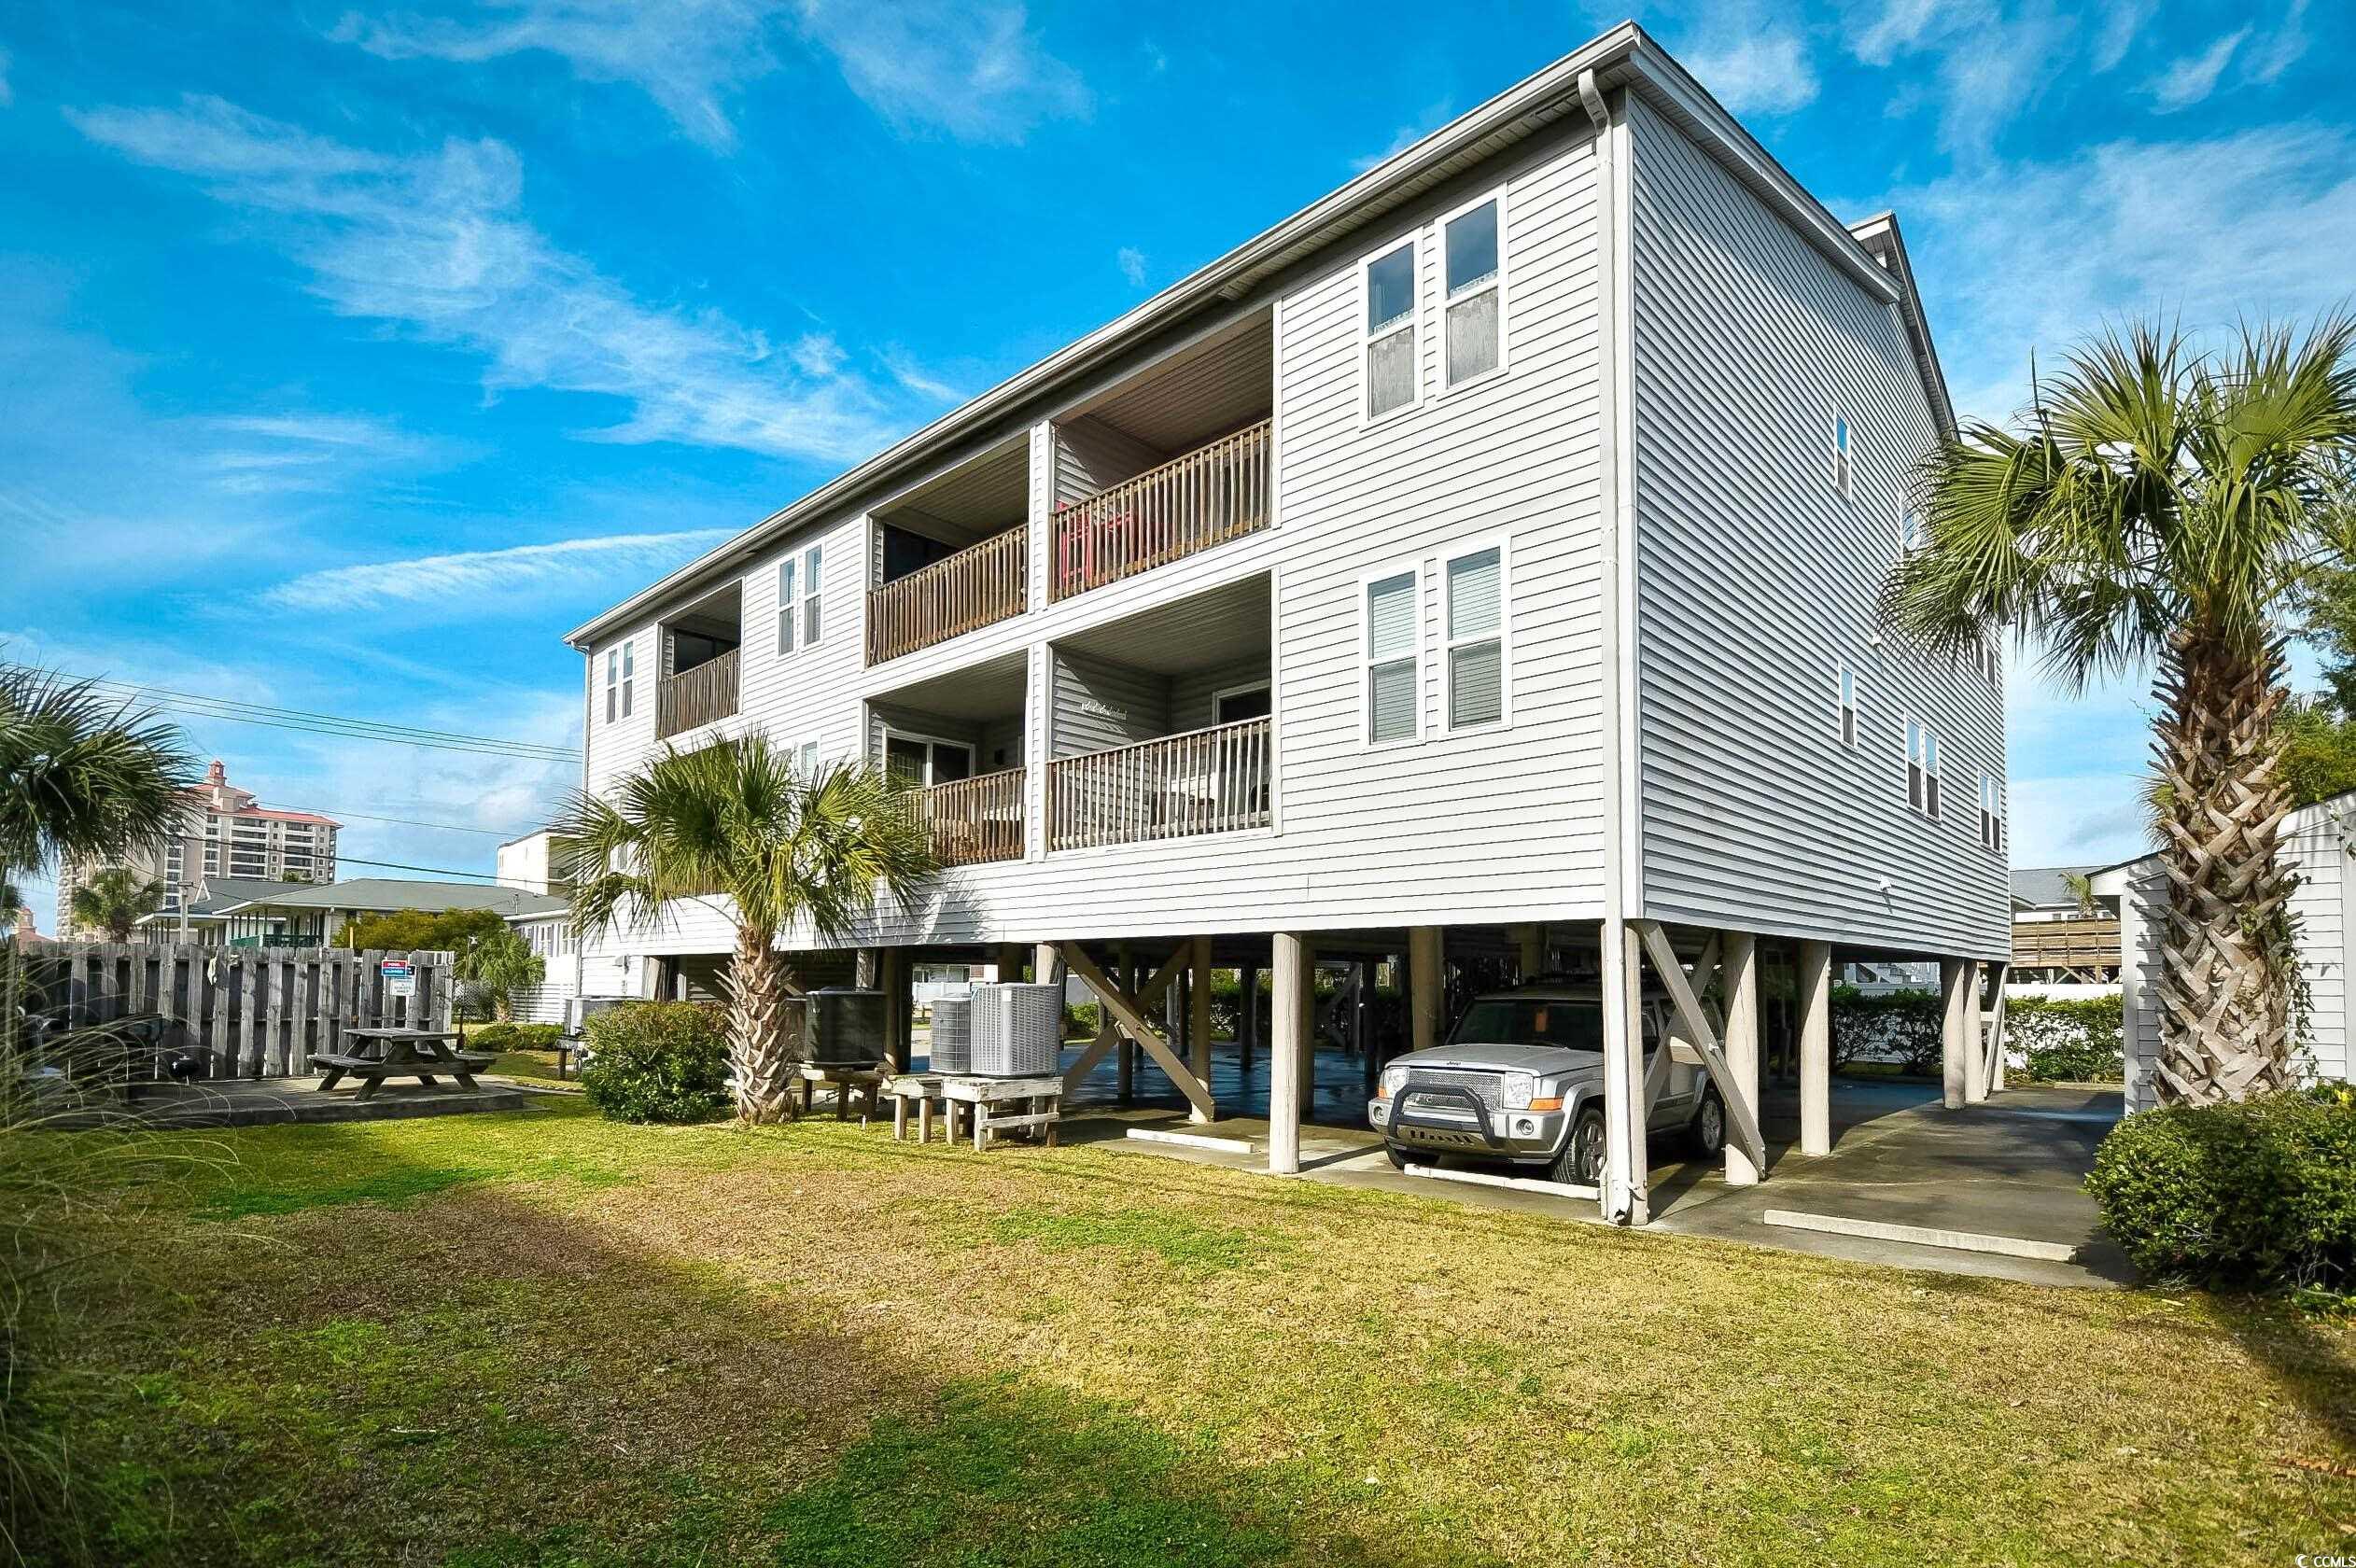 don't miss your opportunity to own this extremely rare- 3 bedroom, 2 bathroom condo in the small building- ocean terrace, located across the street from the beach in the heart of north myrtle beach. this unit features updated flooring and beautifully coordinated furnishing throughout the main living areas! the full size kitchen is equipped with all appliances, granite countertops and a backsplash! all furnishings, washer/dryer, decor, and kitchenware convey with sale, so this unit is truly move-in or rental ready immediately upon closing! with a balcony facing toward the beach and the ocean just a few steps across the street, this unit makes the perfect second home, investment opportunity, or vacation getaway. located close to grocery stores, and all of the grand strand's famous dining, shopping, golf, and entertainment attractions. schedule your showing today!